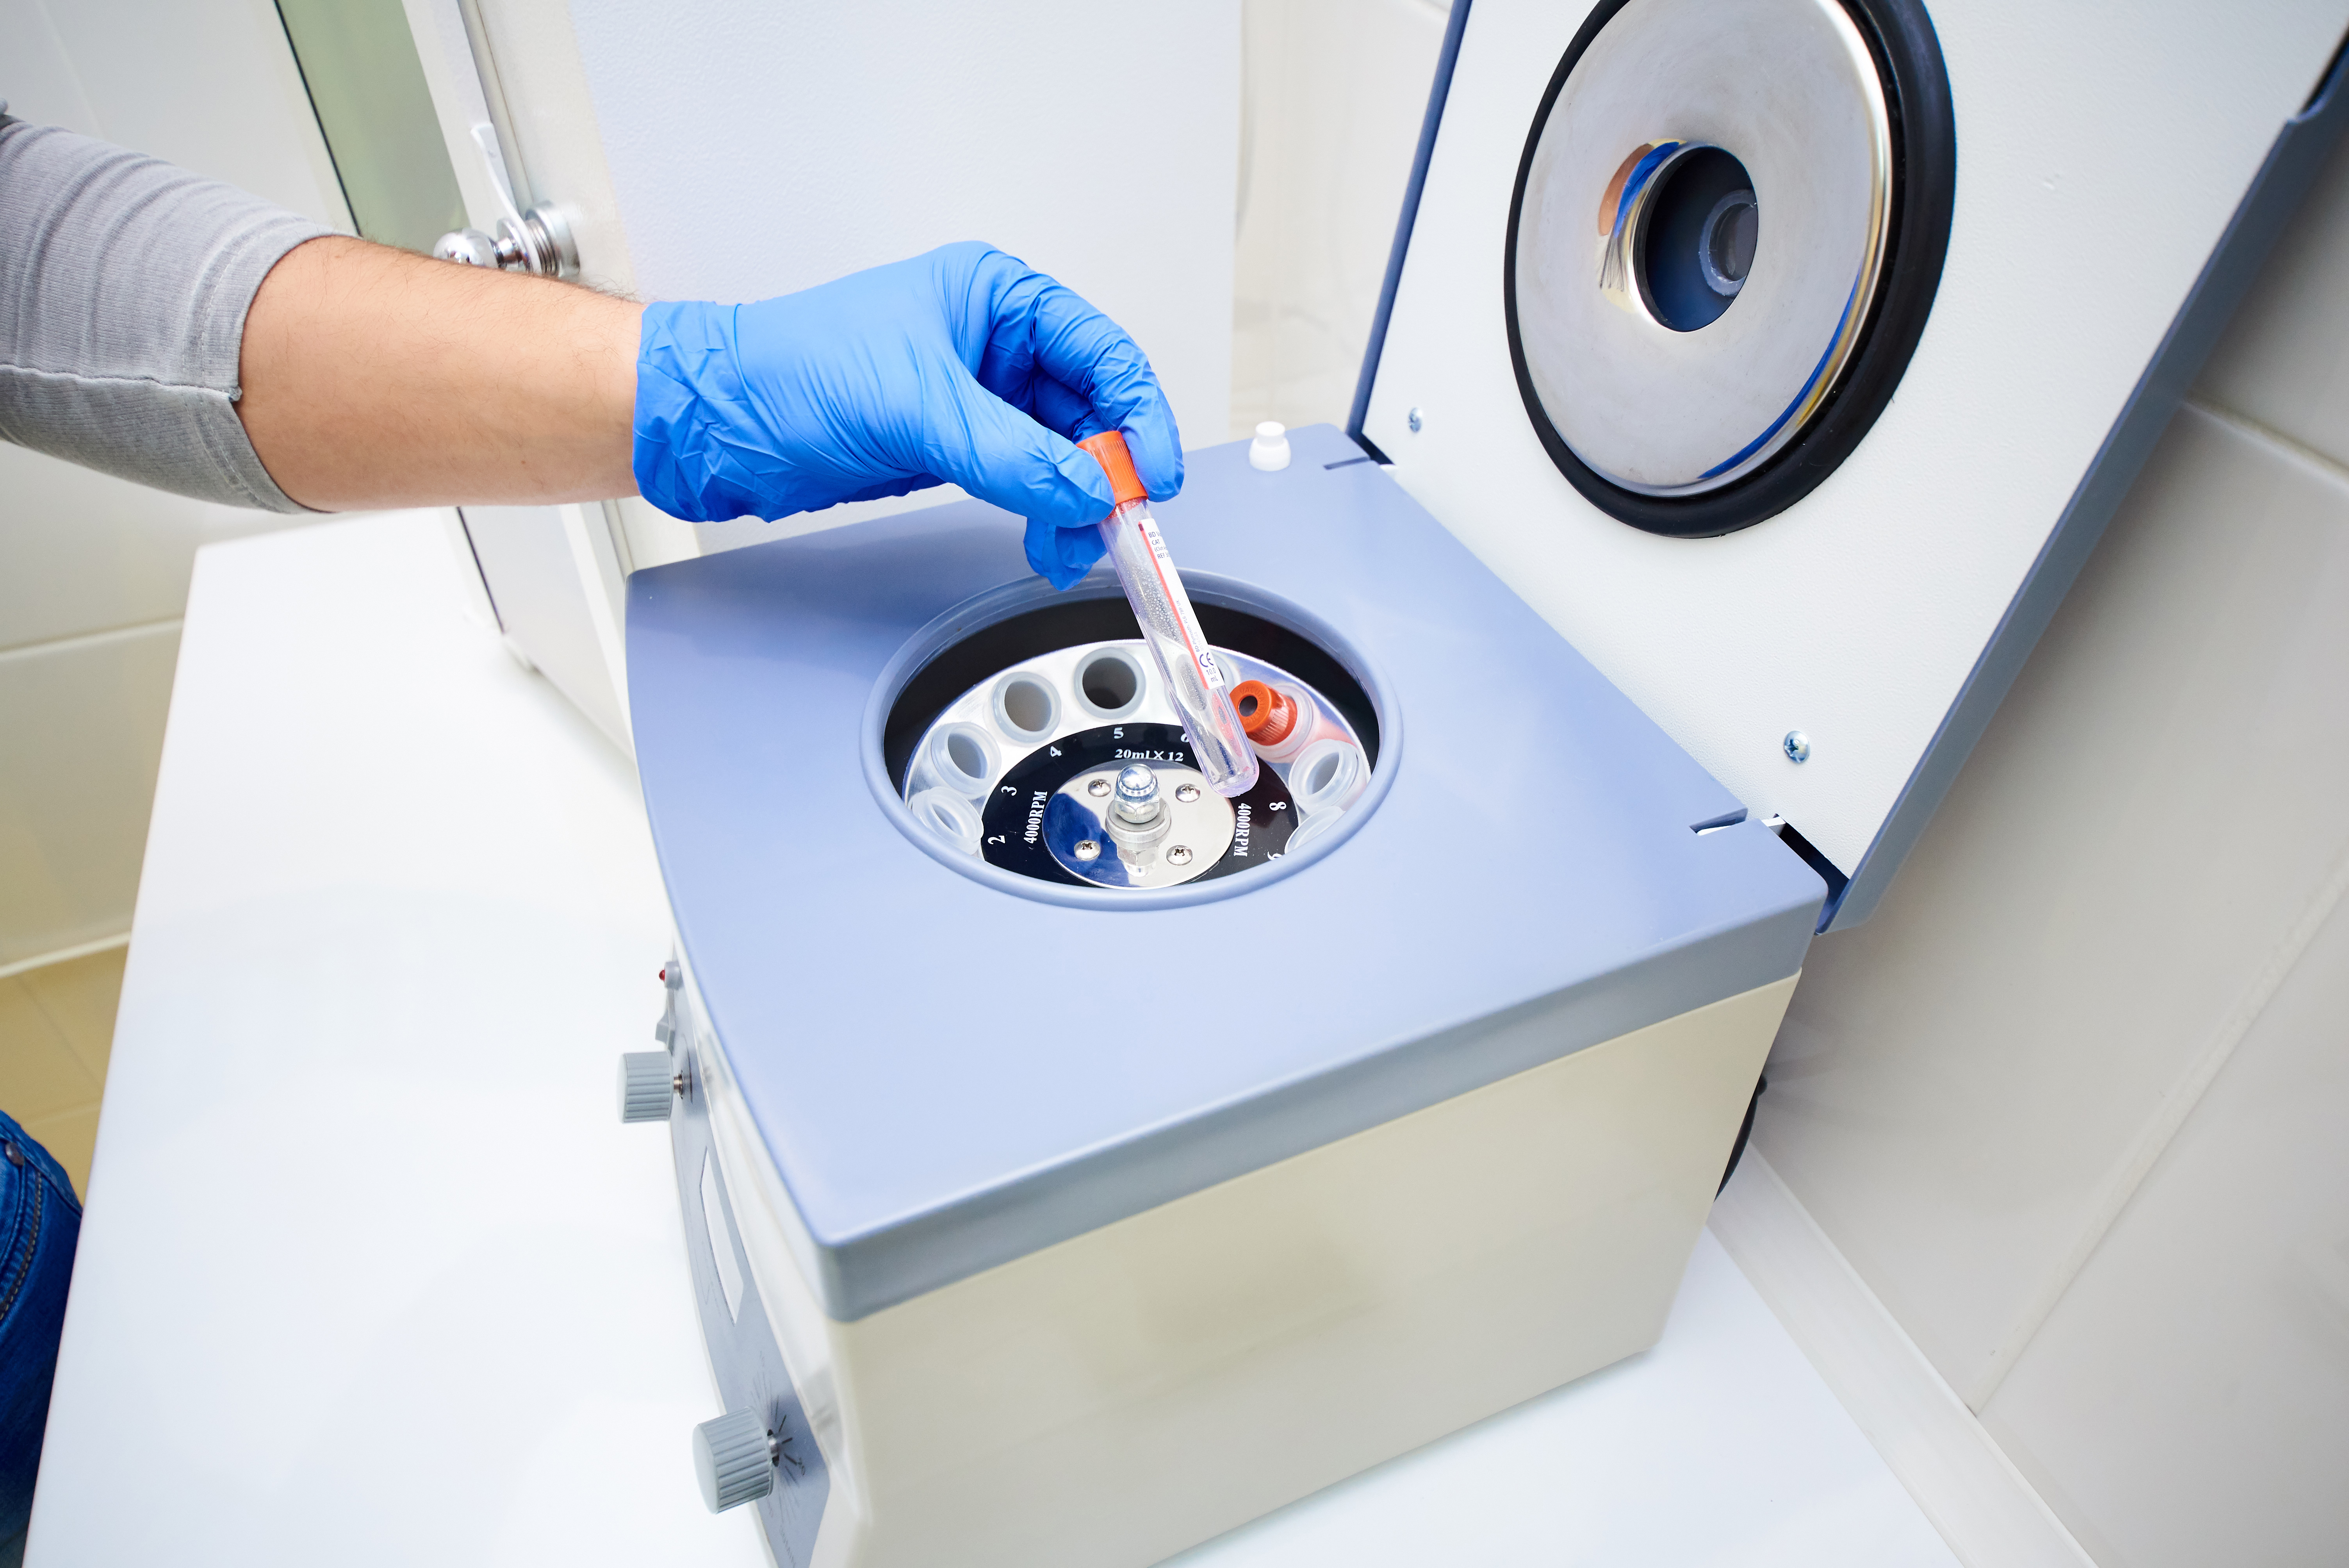 Regenerative Dentistry uses a centrifuge to extract PRF